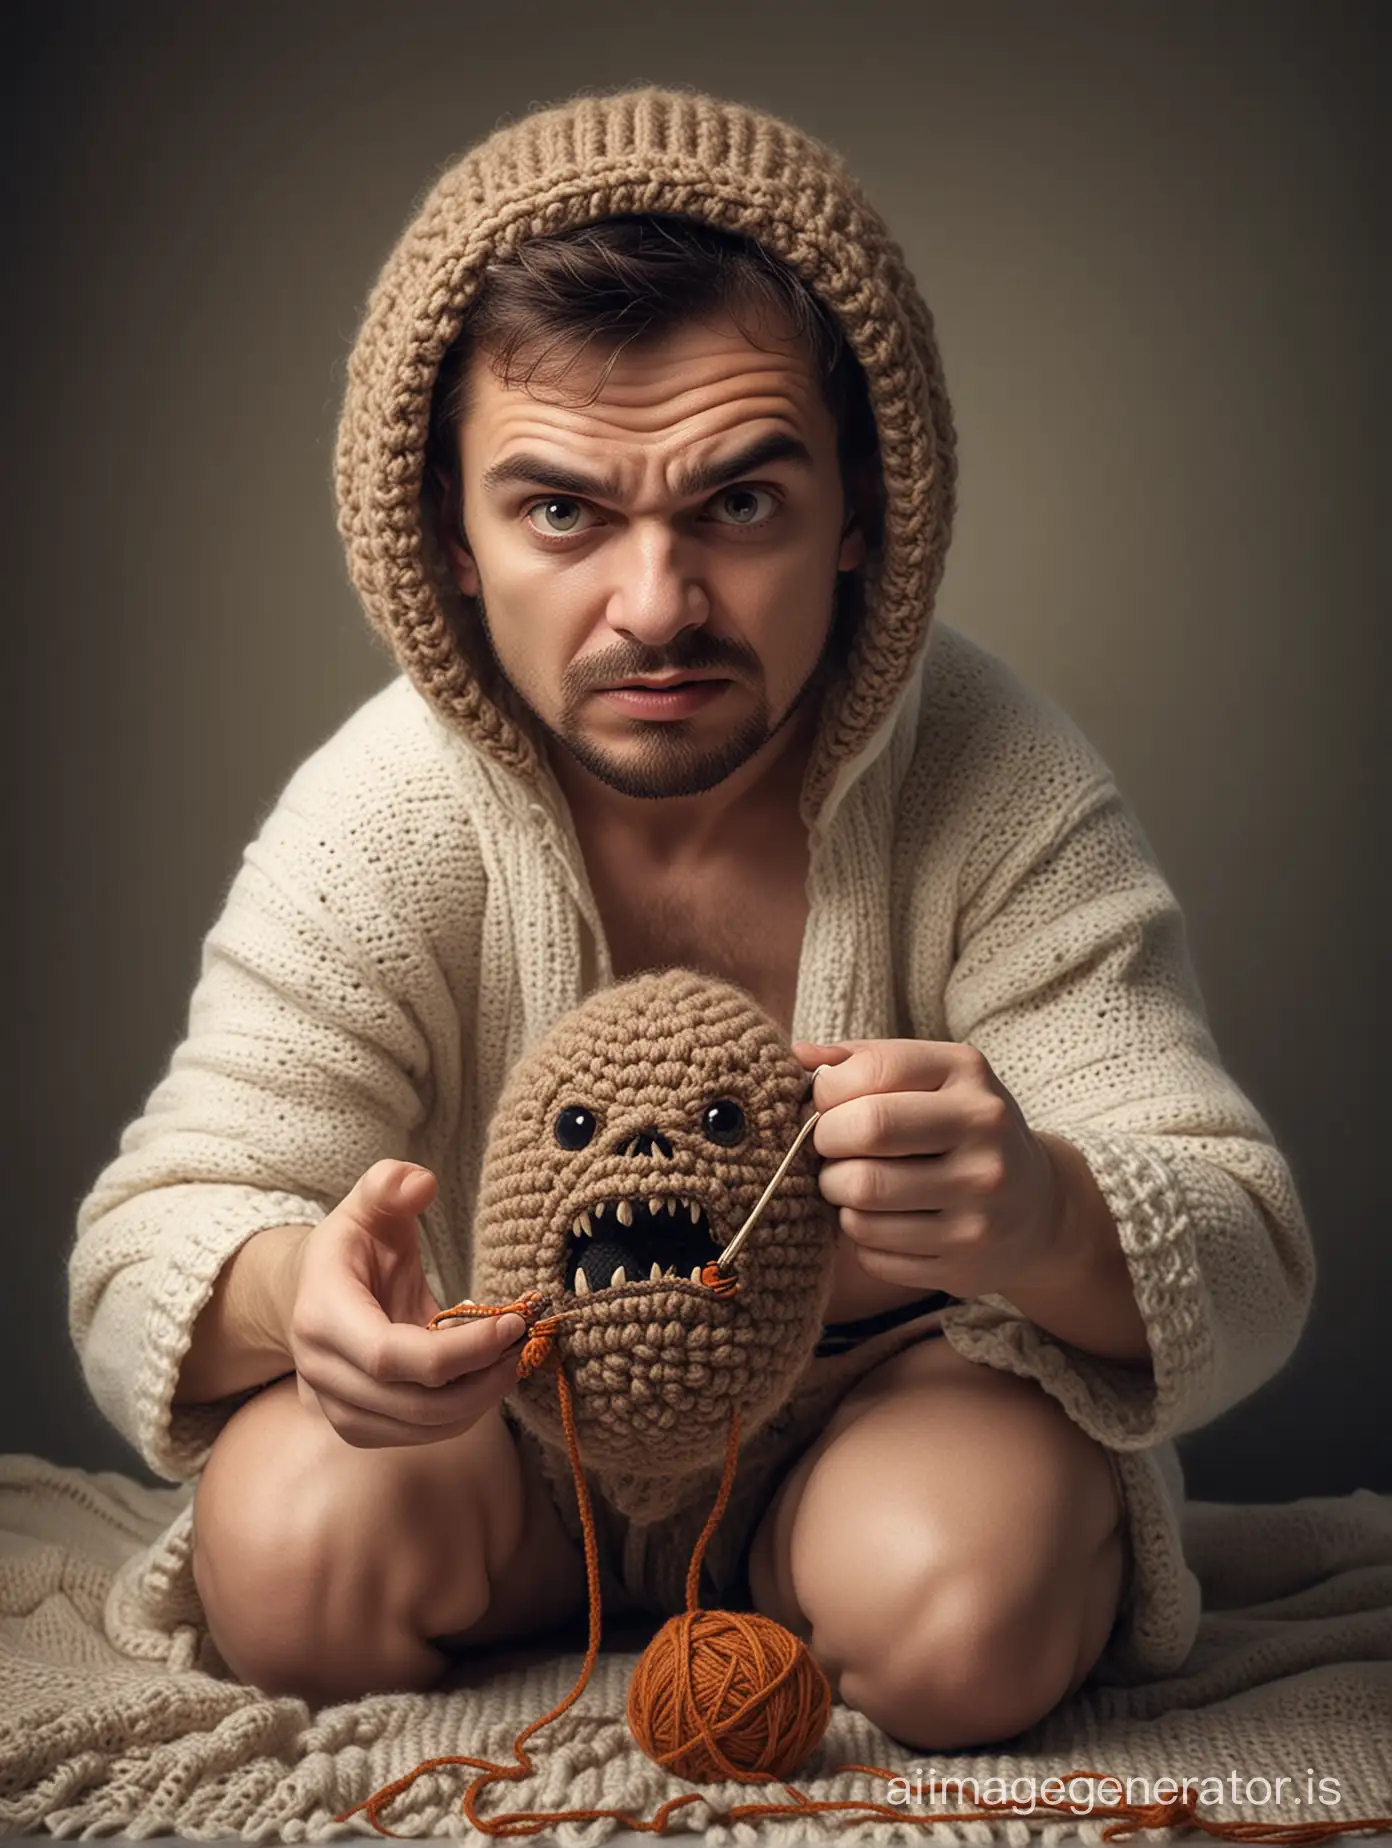 a scary russian guy crocheting something cute. Realistic photograph.